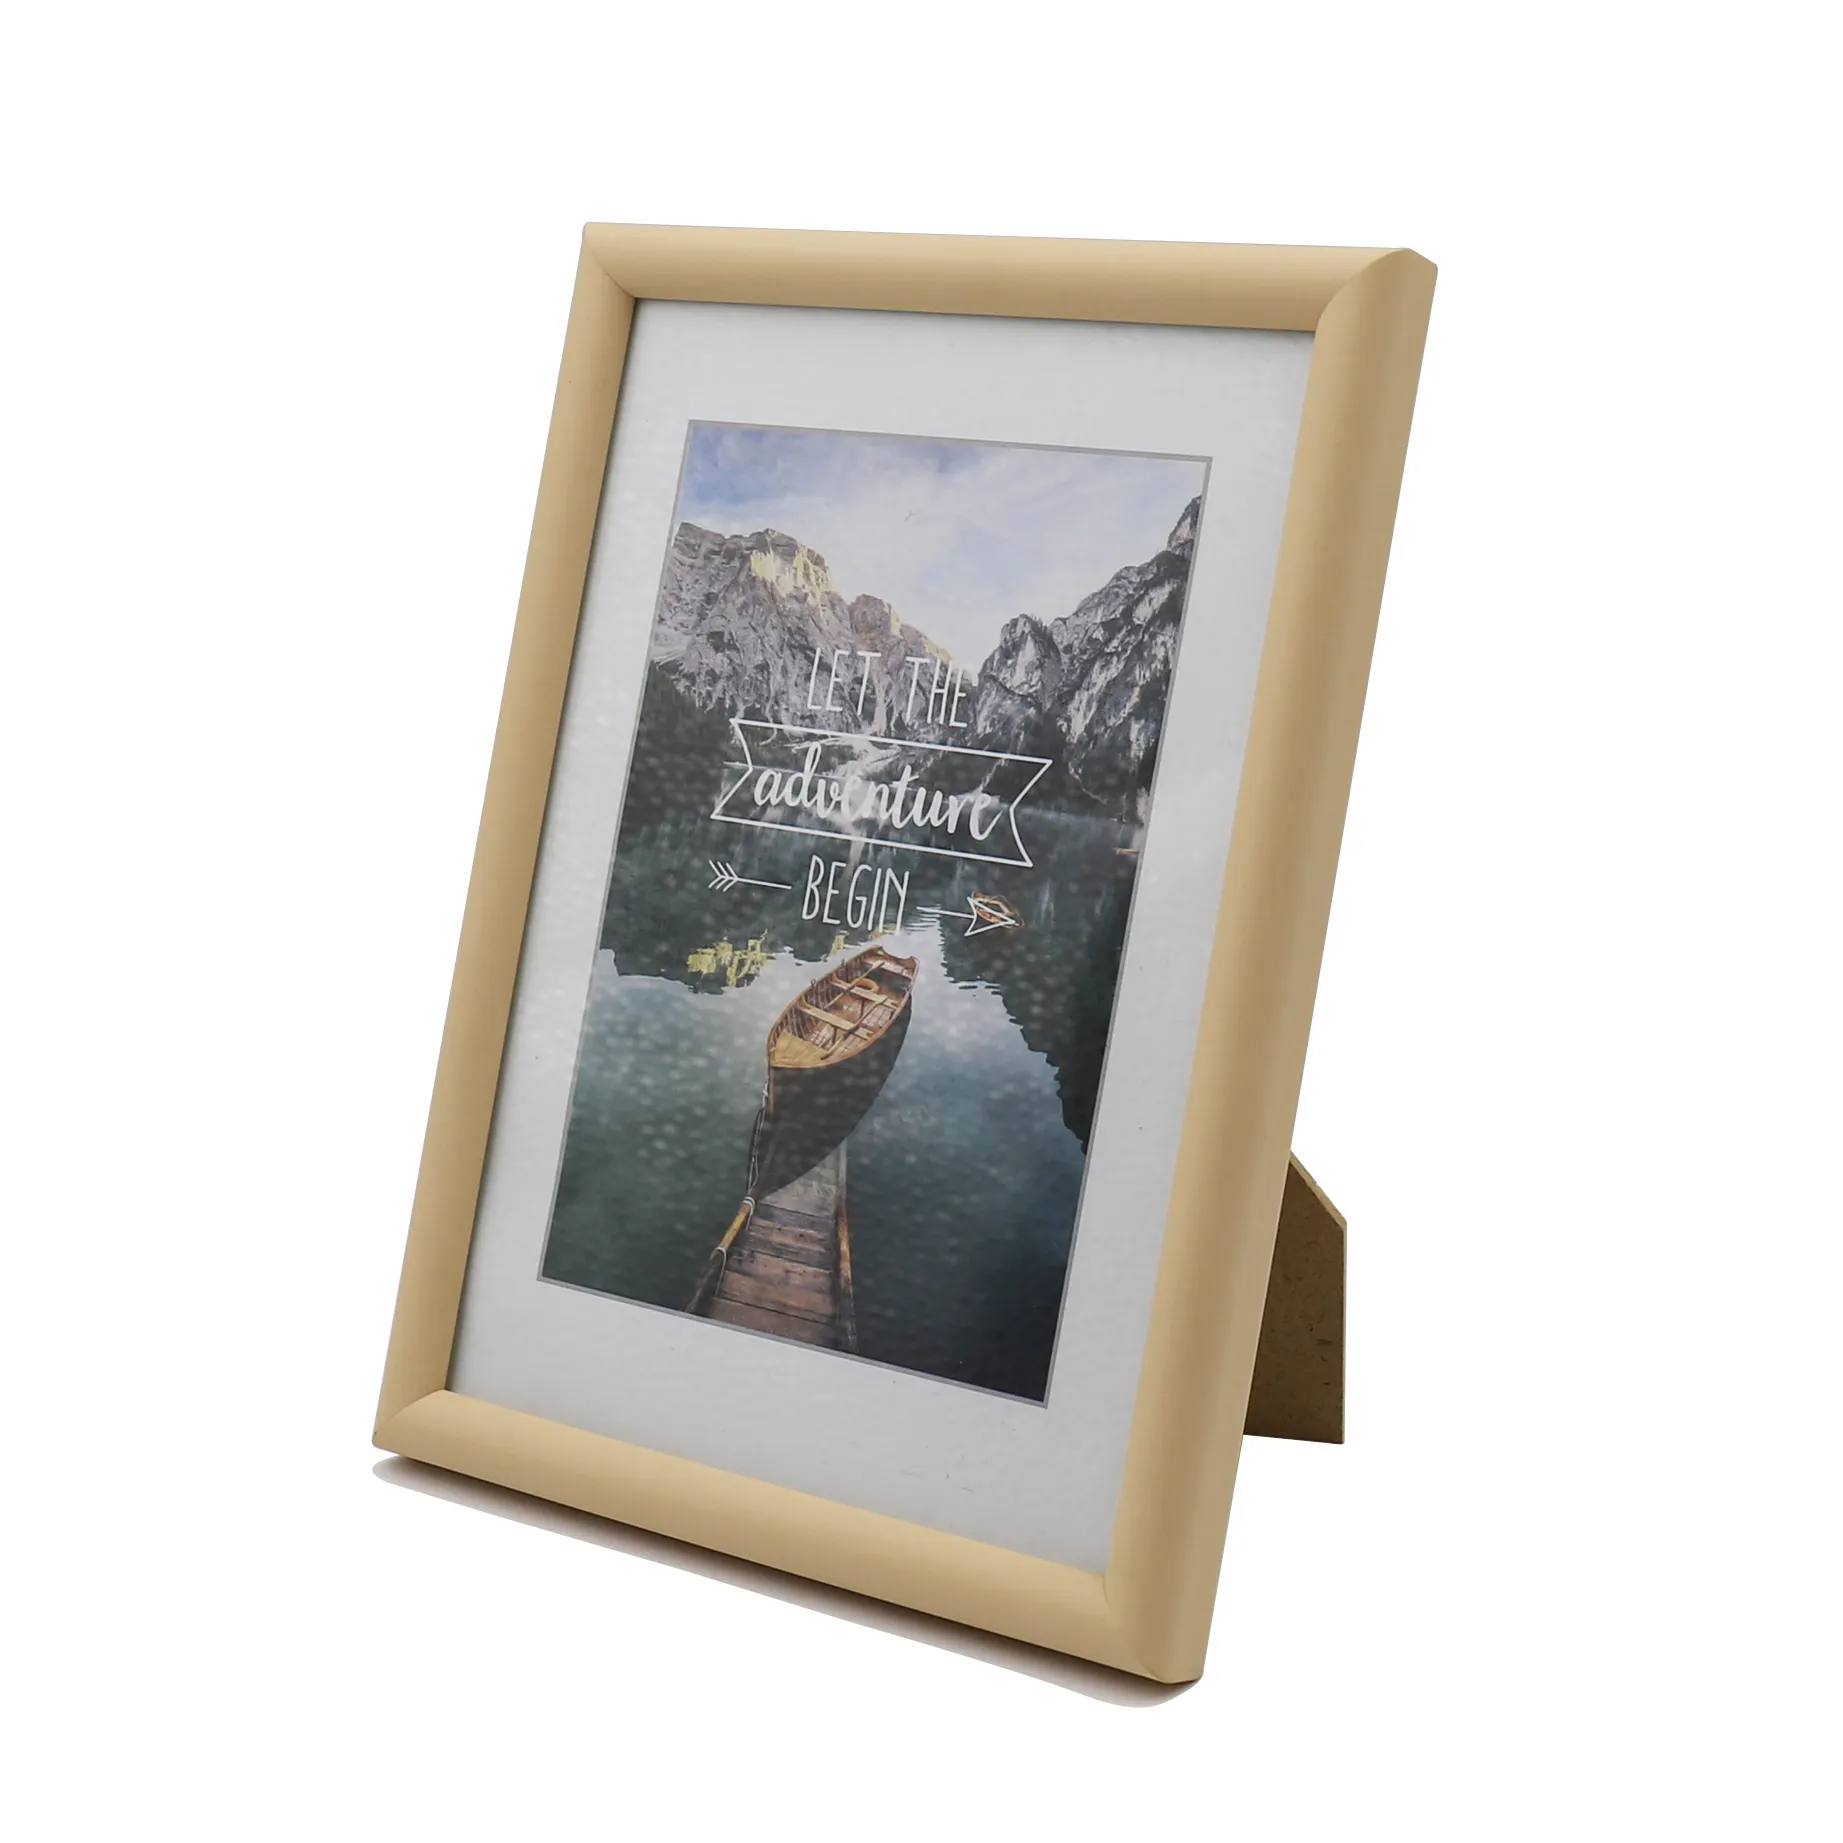 picture frame plastic set plastic a4 plastic frames for pictures acrylic photo frame 4x6 5x7 8x10 A3 A4